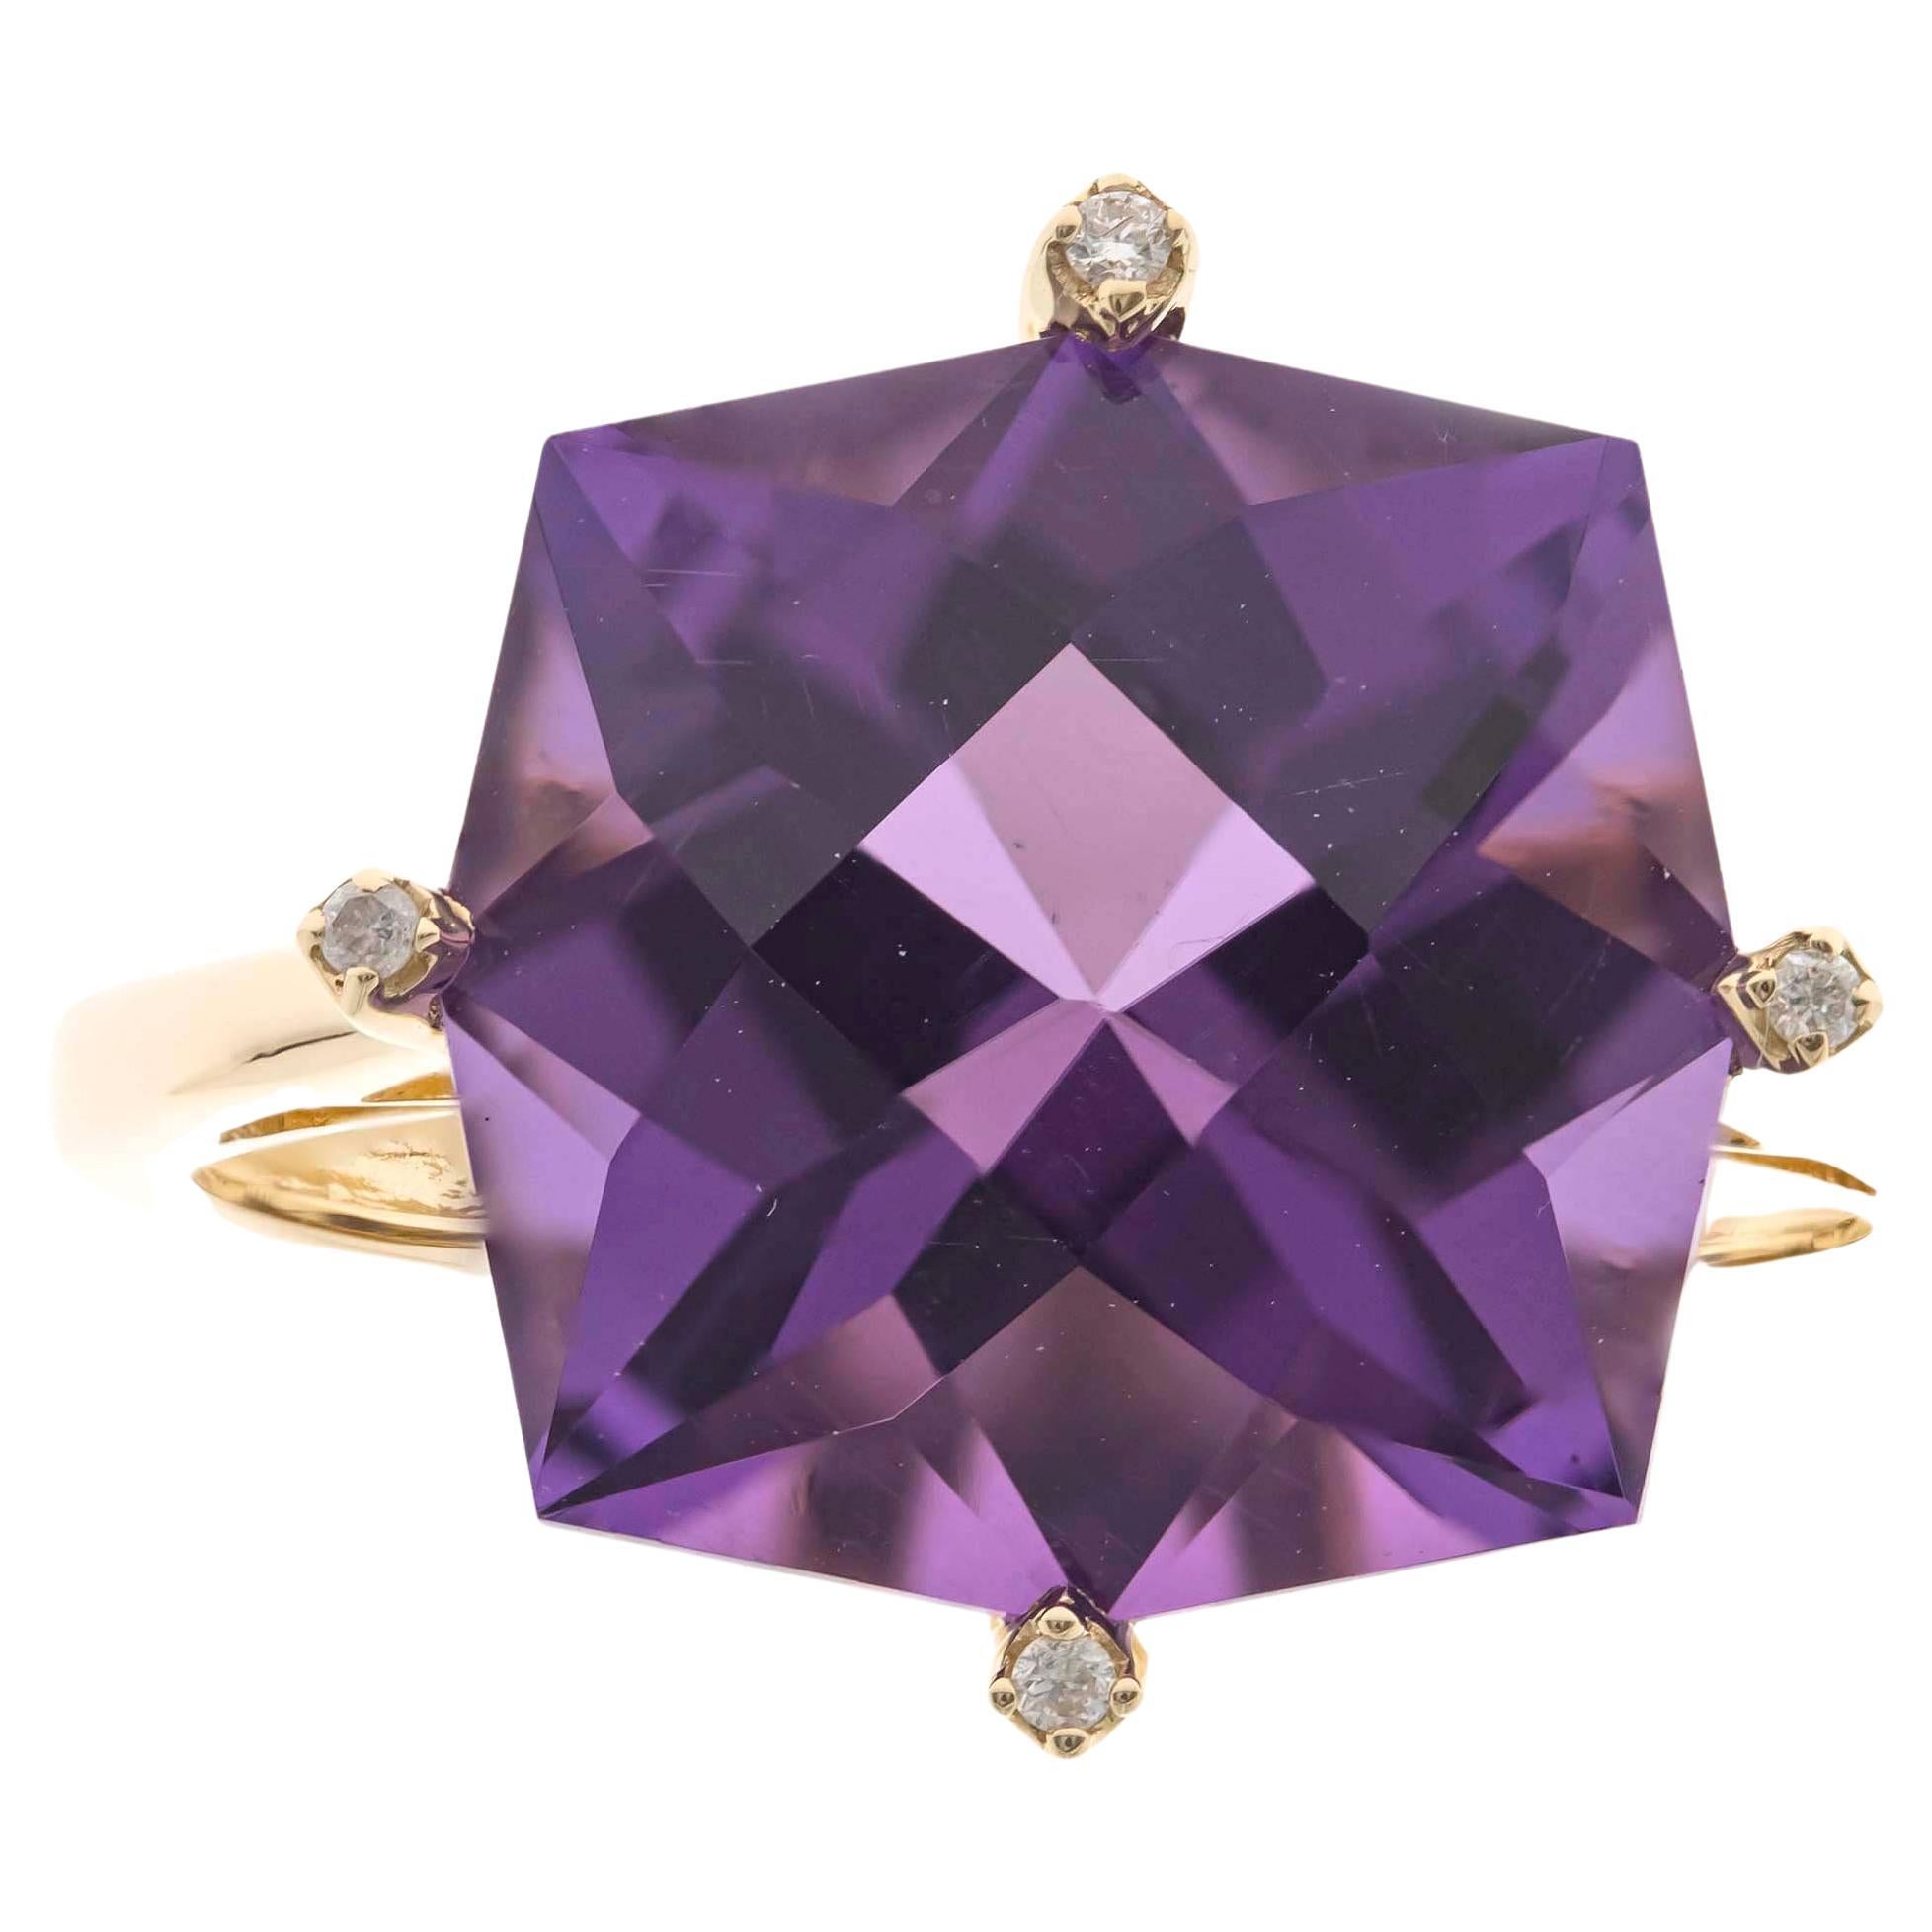 5.42 carat Cushion-cut Amethyst With Diamond accents 14K Yellow Gold Ring.